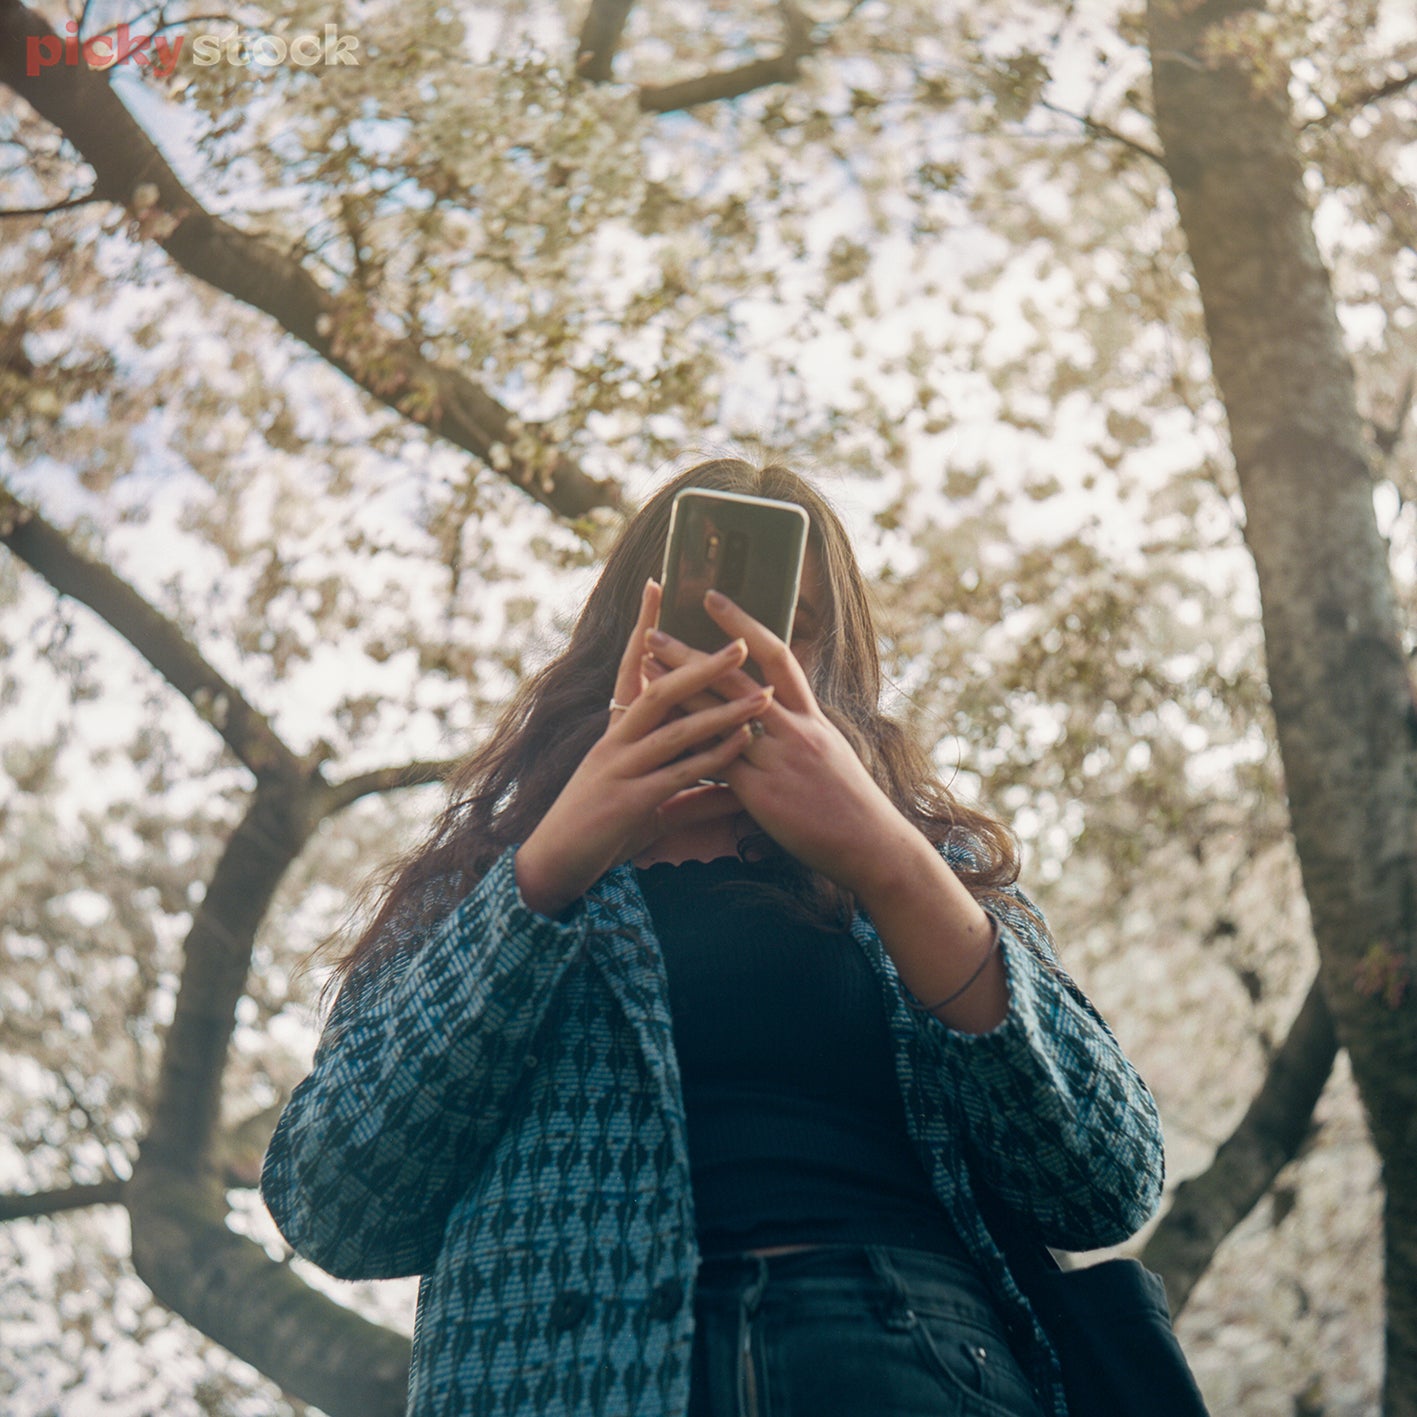 Girl wearing blue patterend jackets with long brown hair. Holding mobile phone which is covering her face making her non-recognisable. Background is a large tree with big brown branches. 